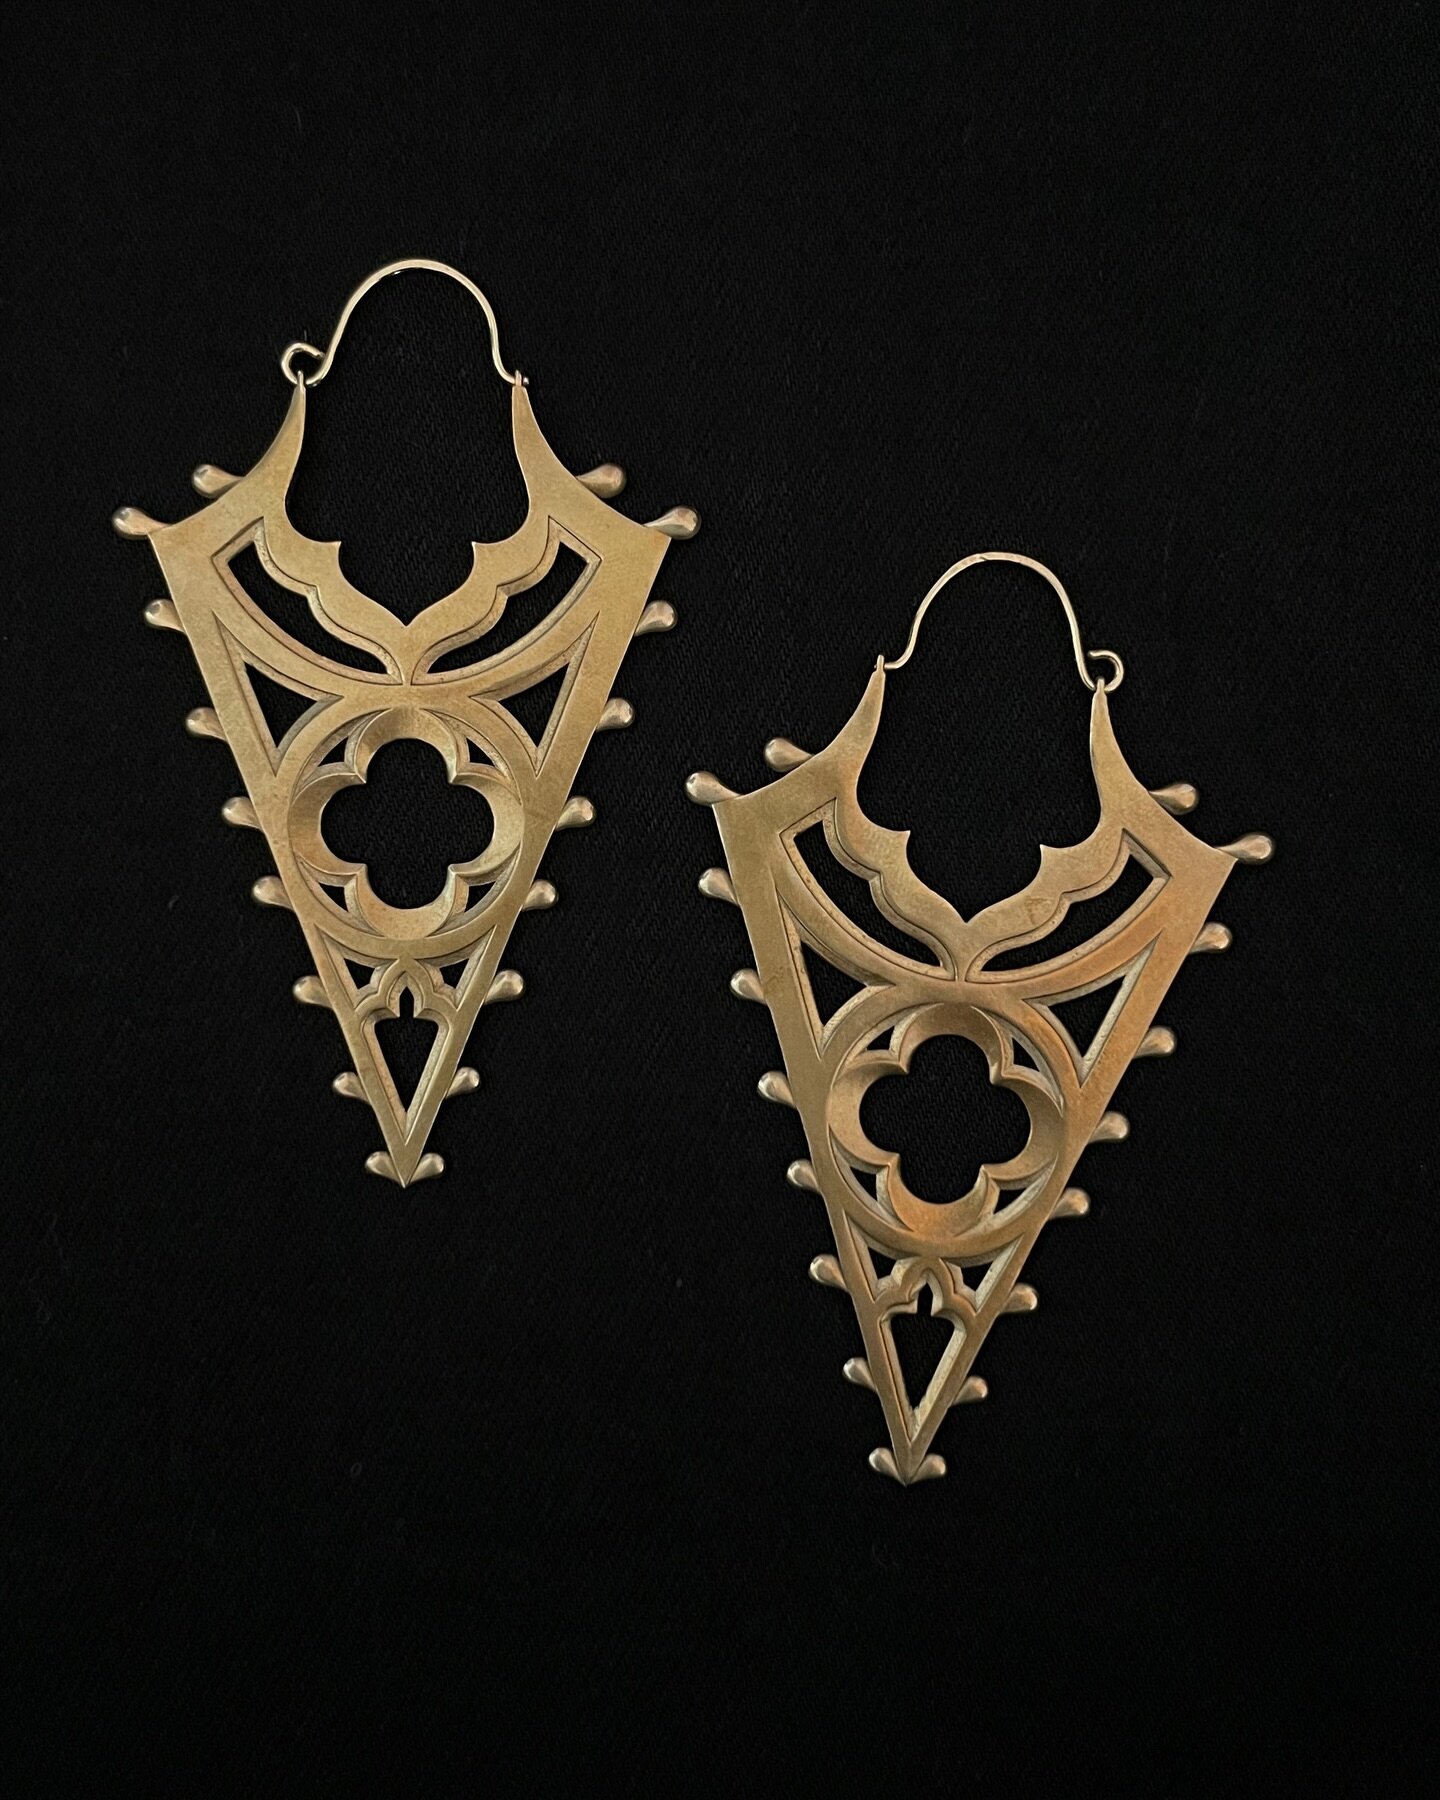 I&rsquo;ll have a restock of Vespira earrings coming soon!